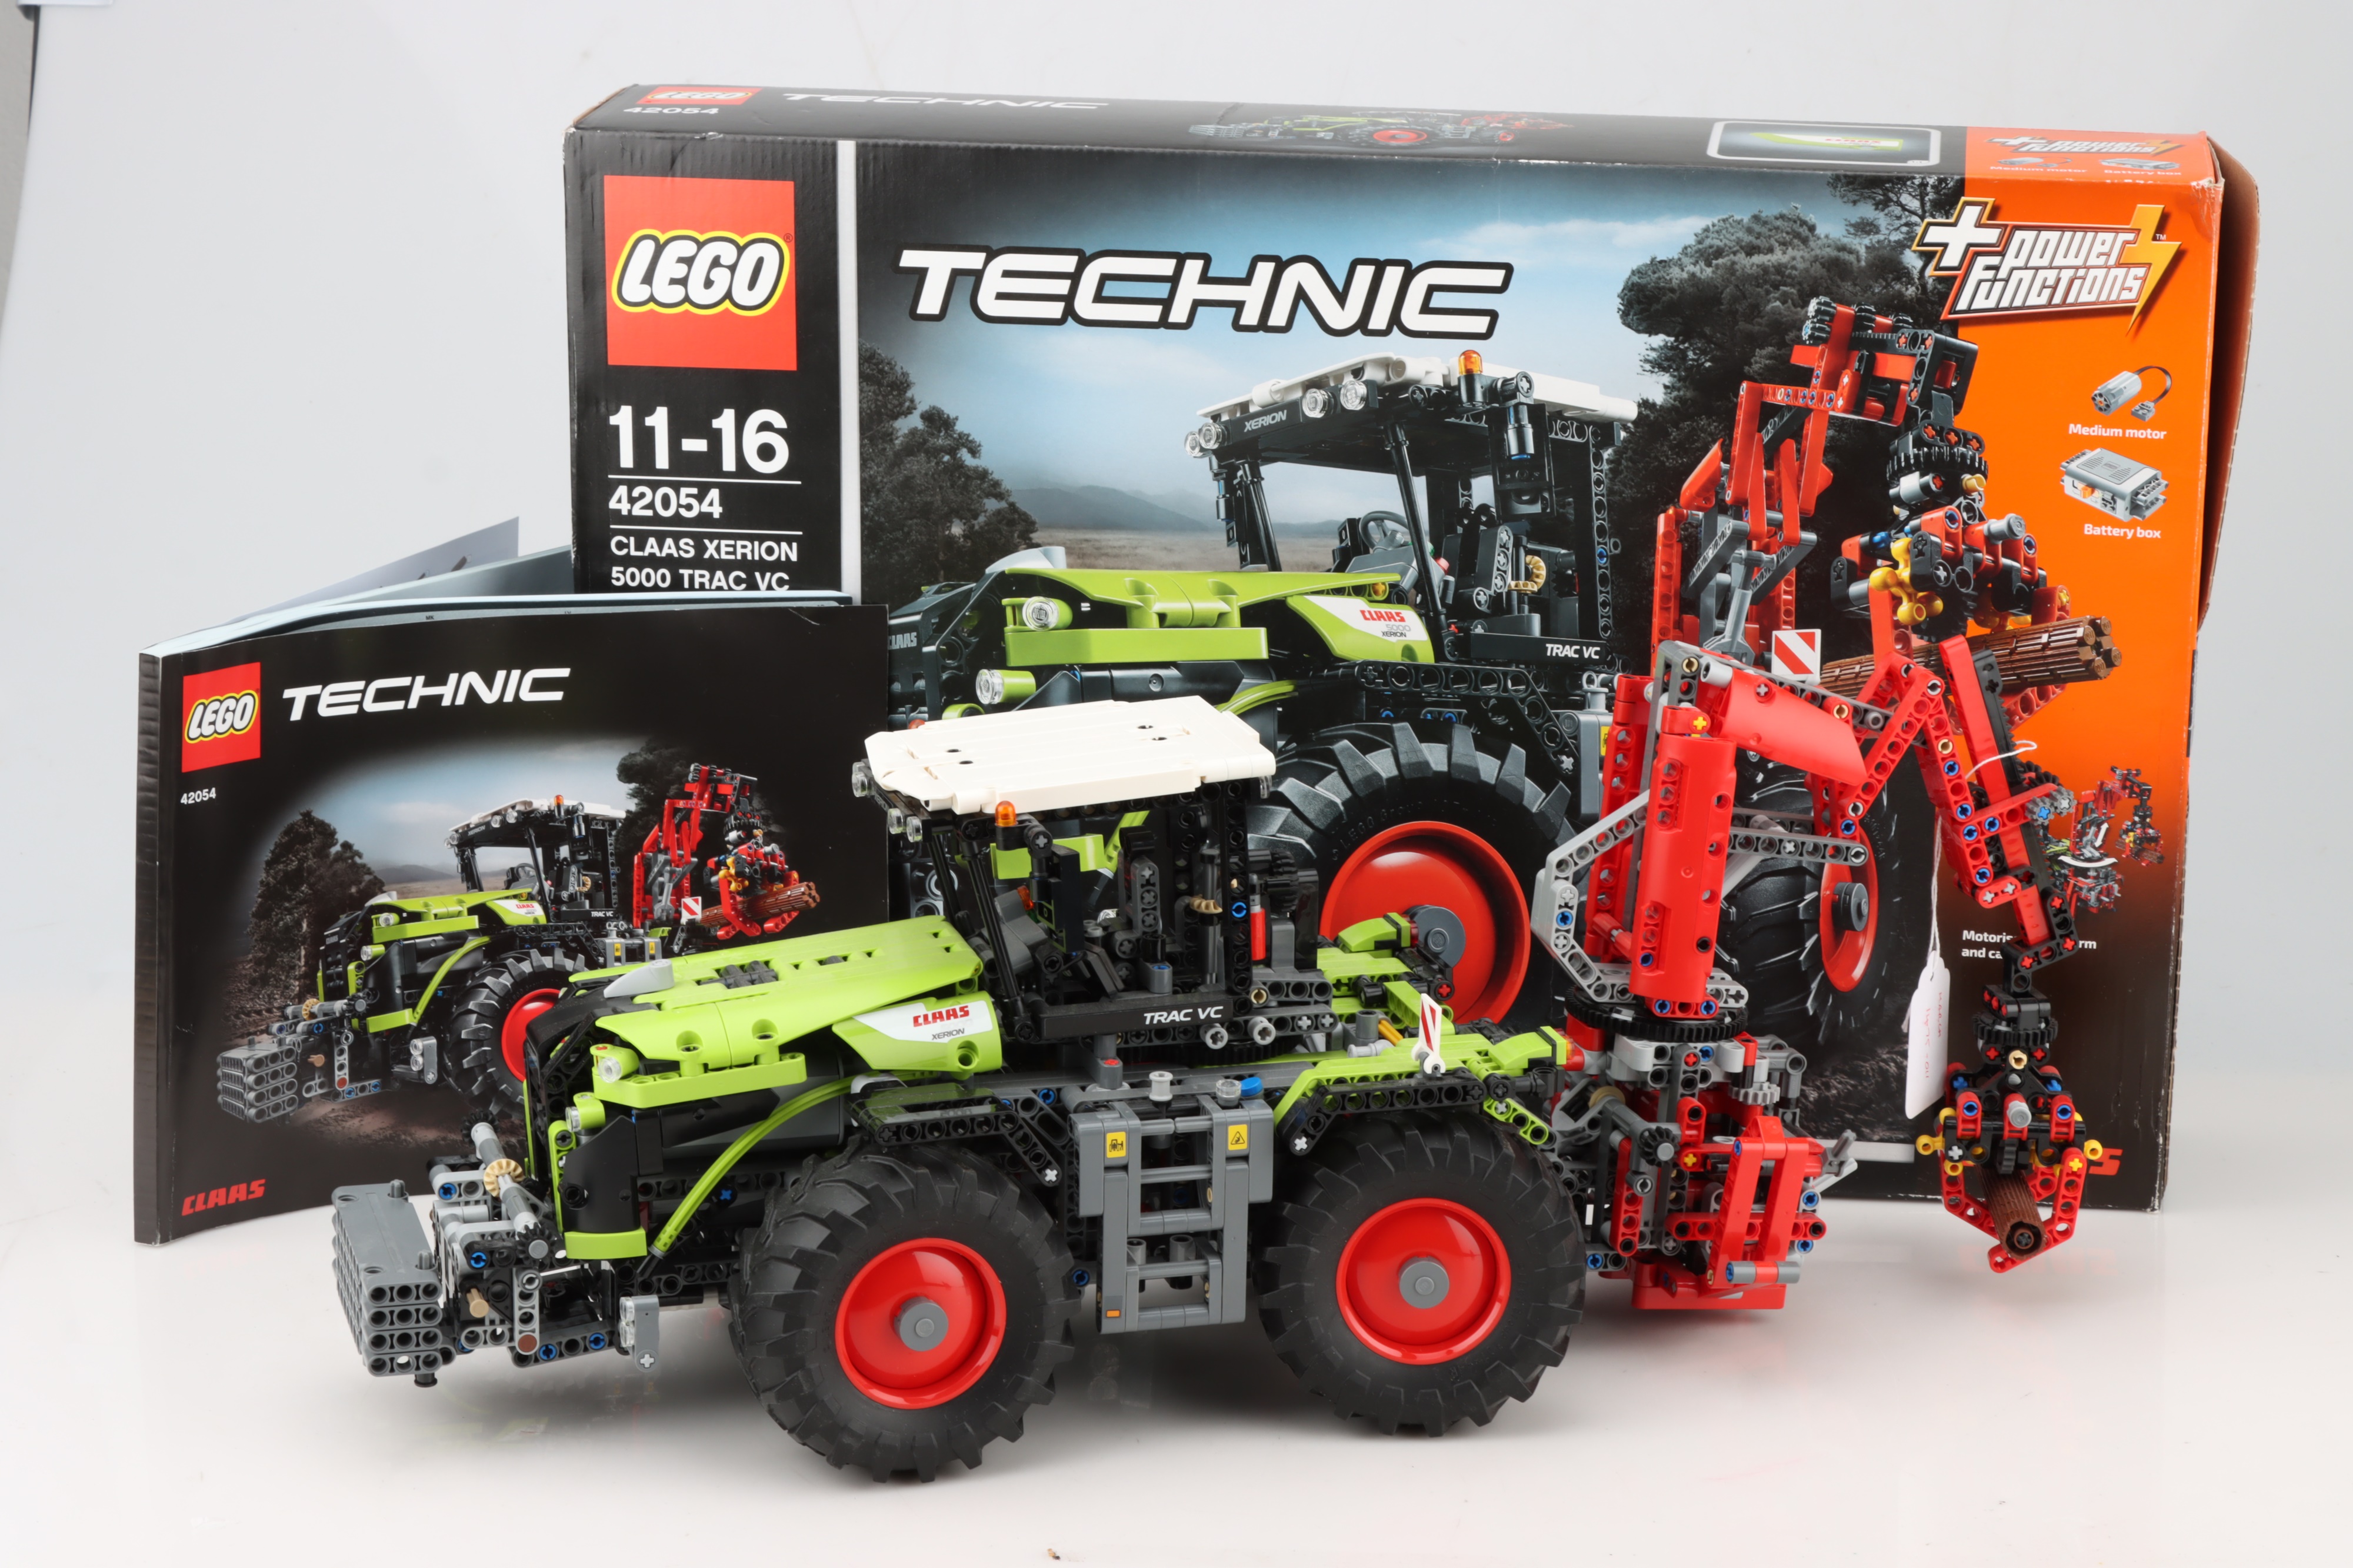 LEGO Technic CLAAS XERION 5000 TRAC VC (42054)